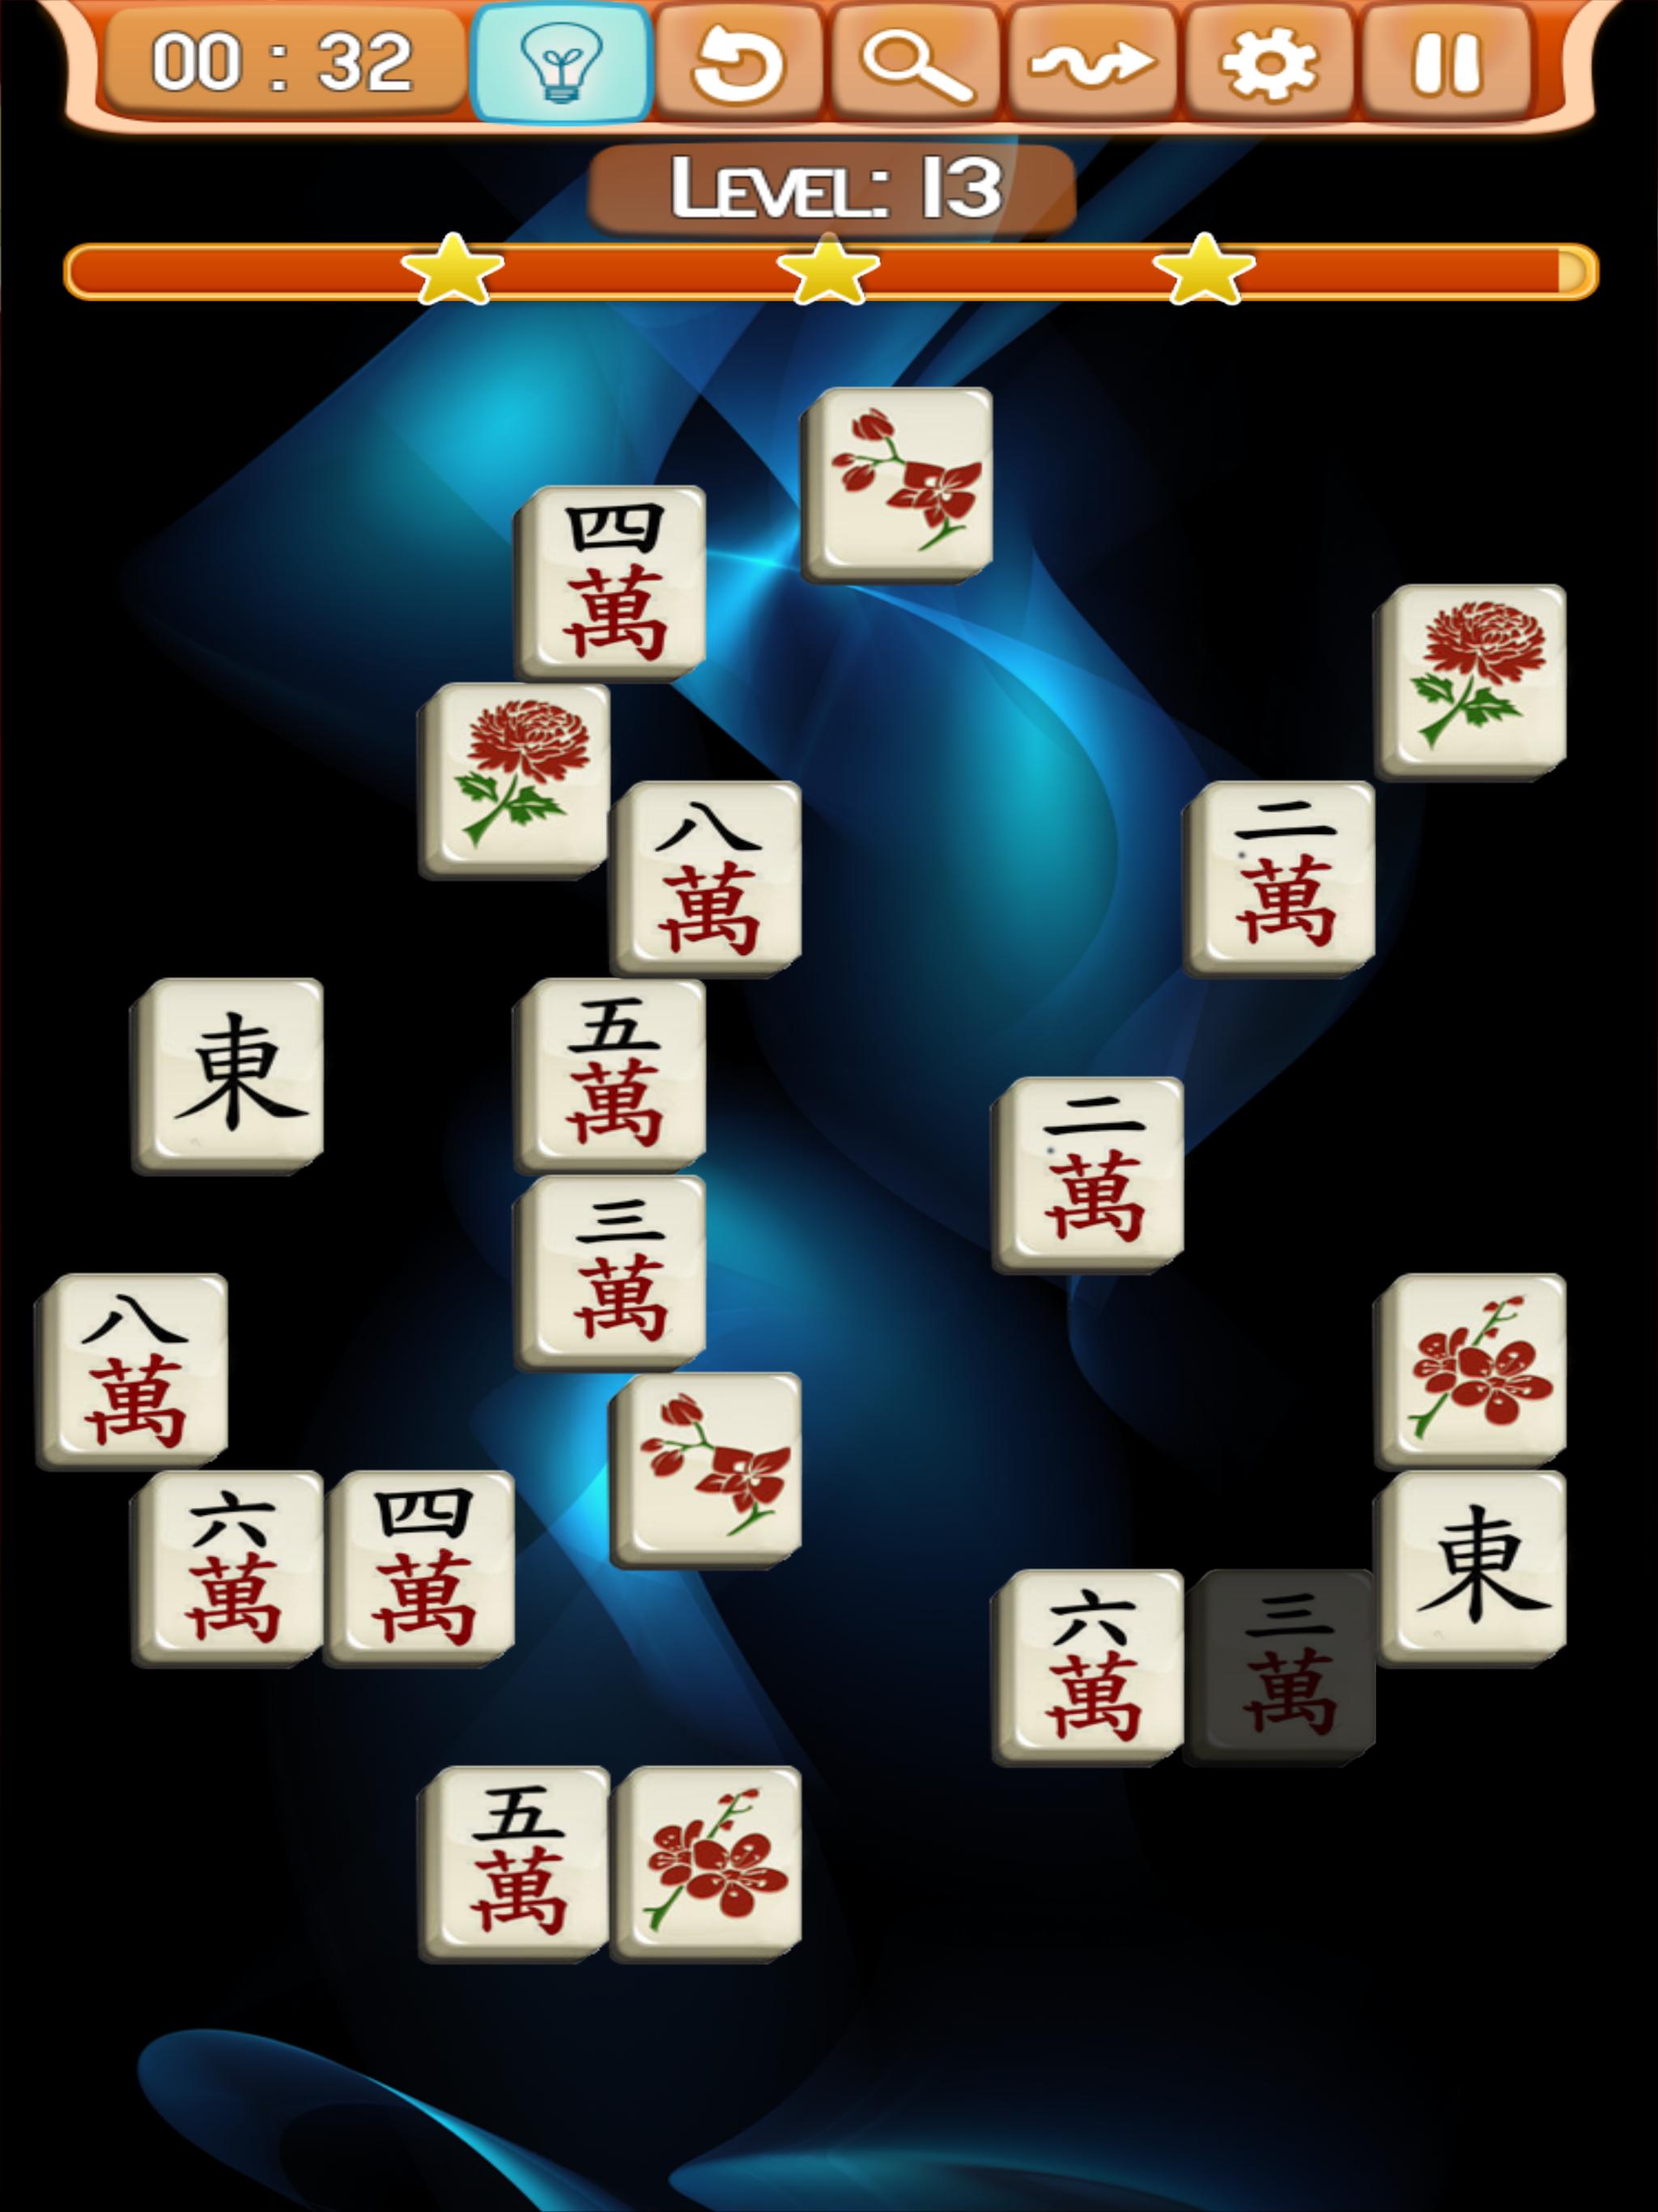 Mahjong Solitaire 3D Free Games For Android - APK Download